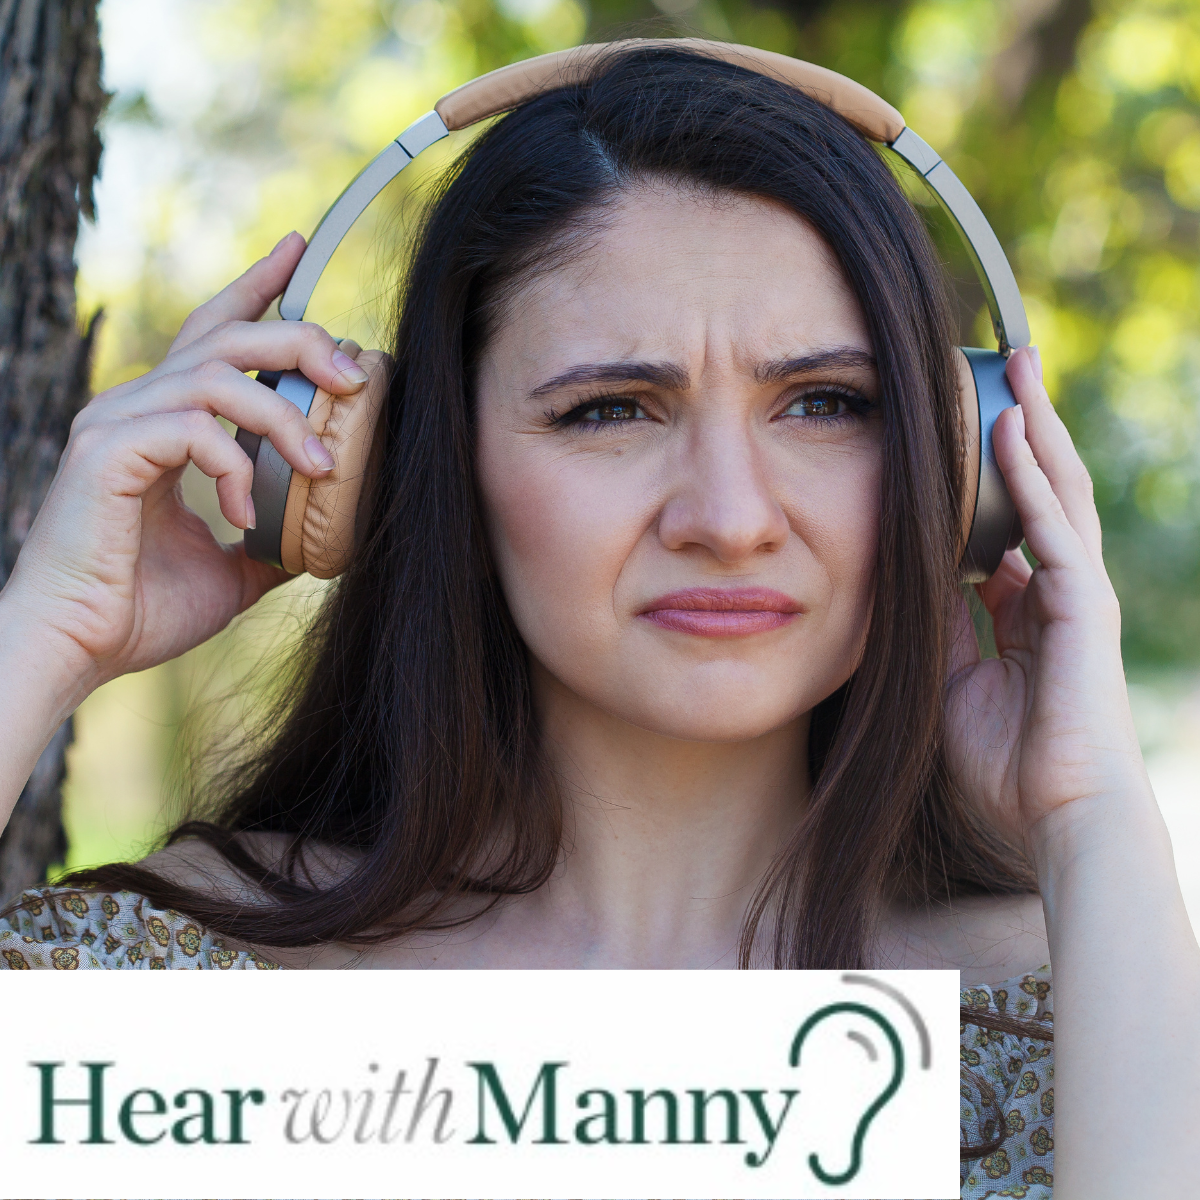 Woman looking concerned taking her headphones off.